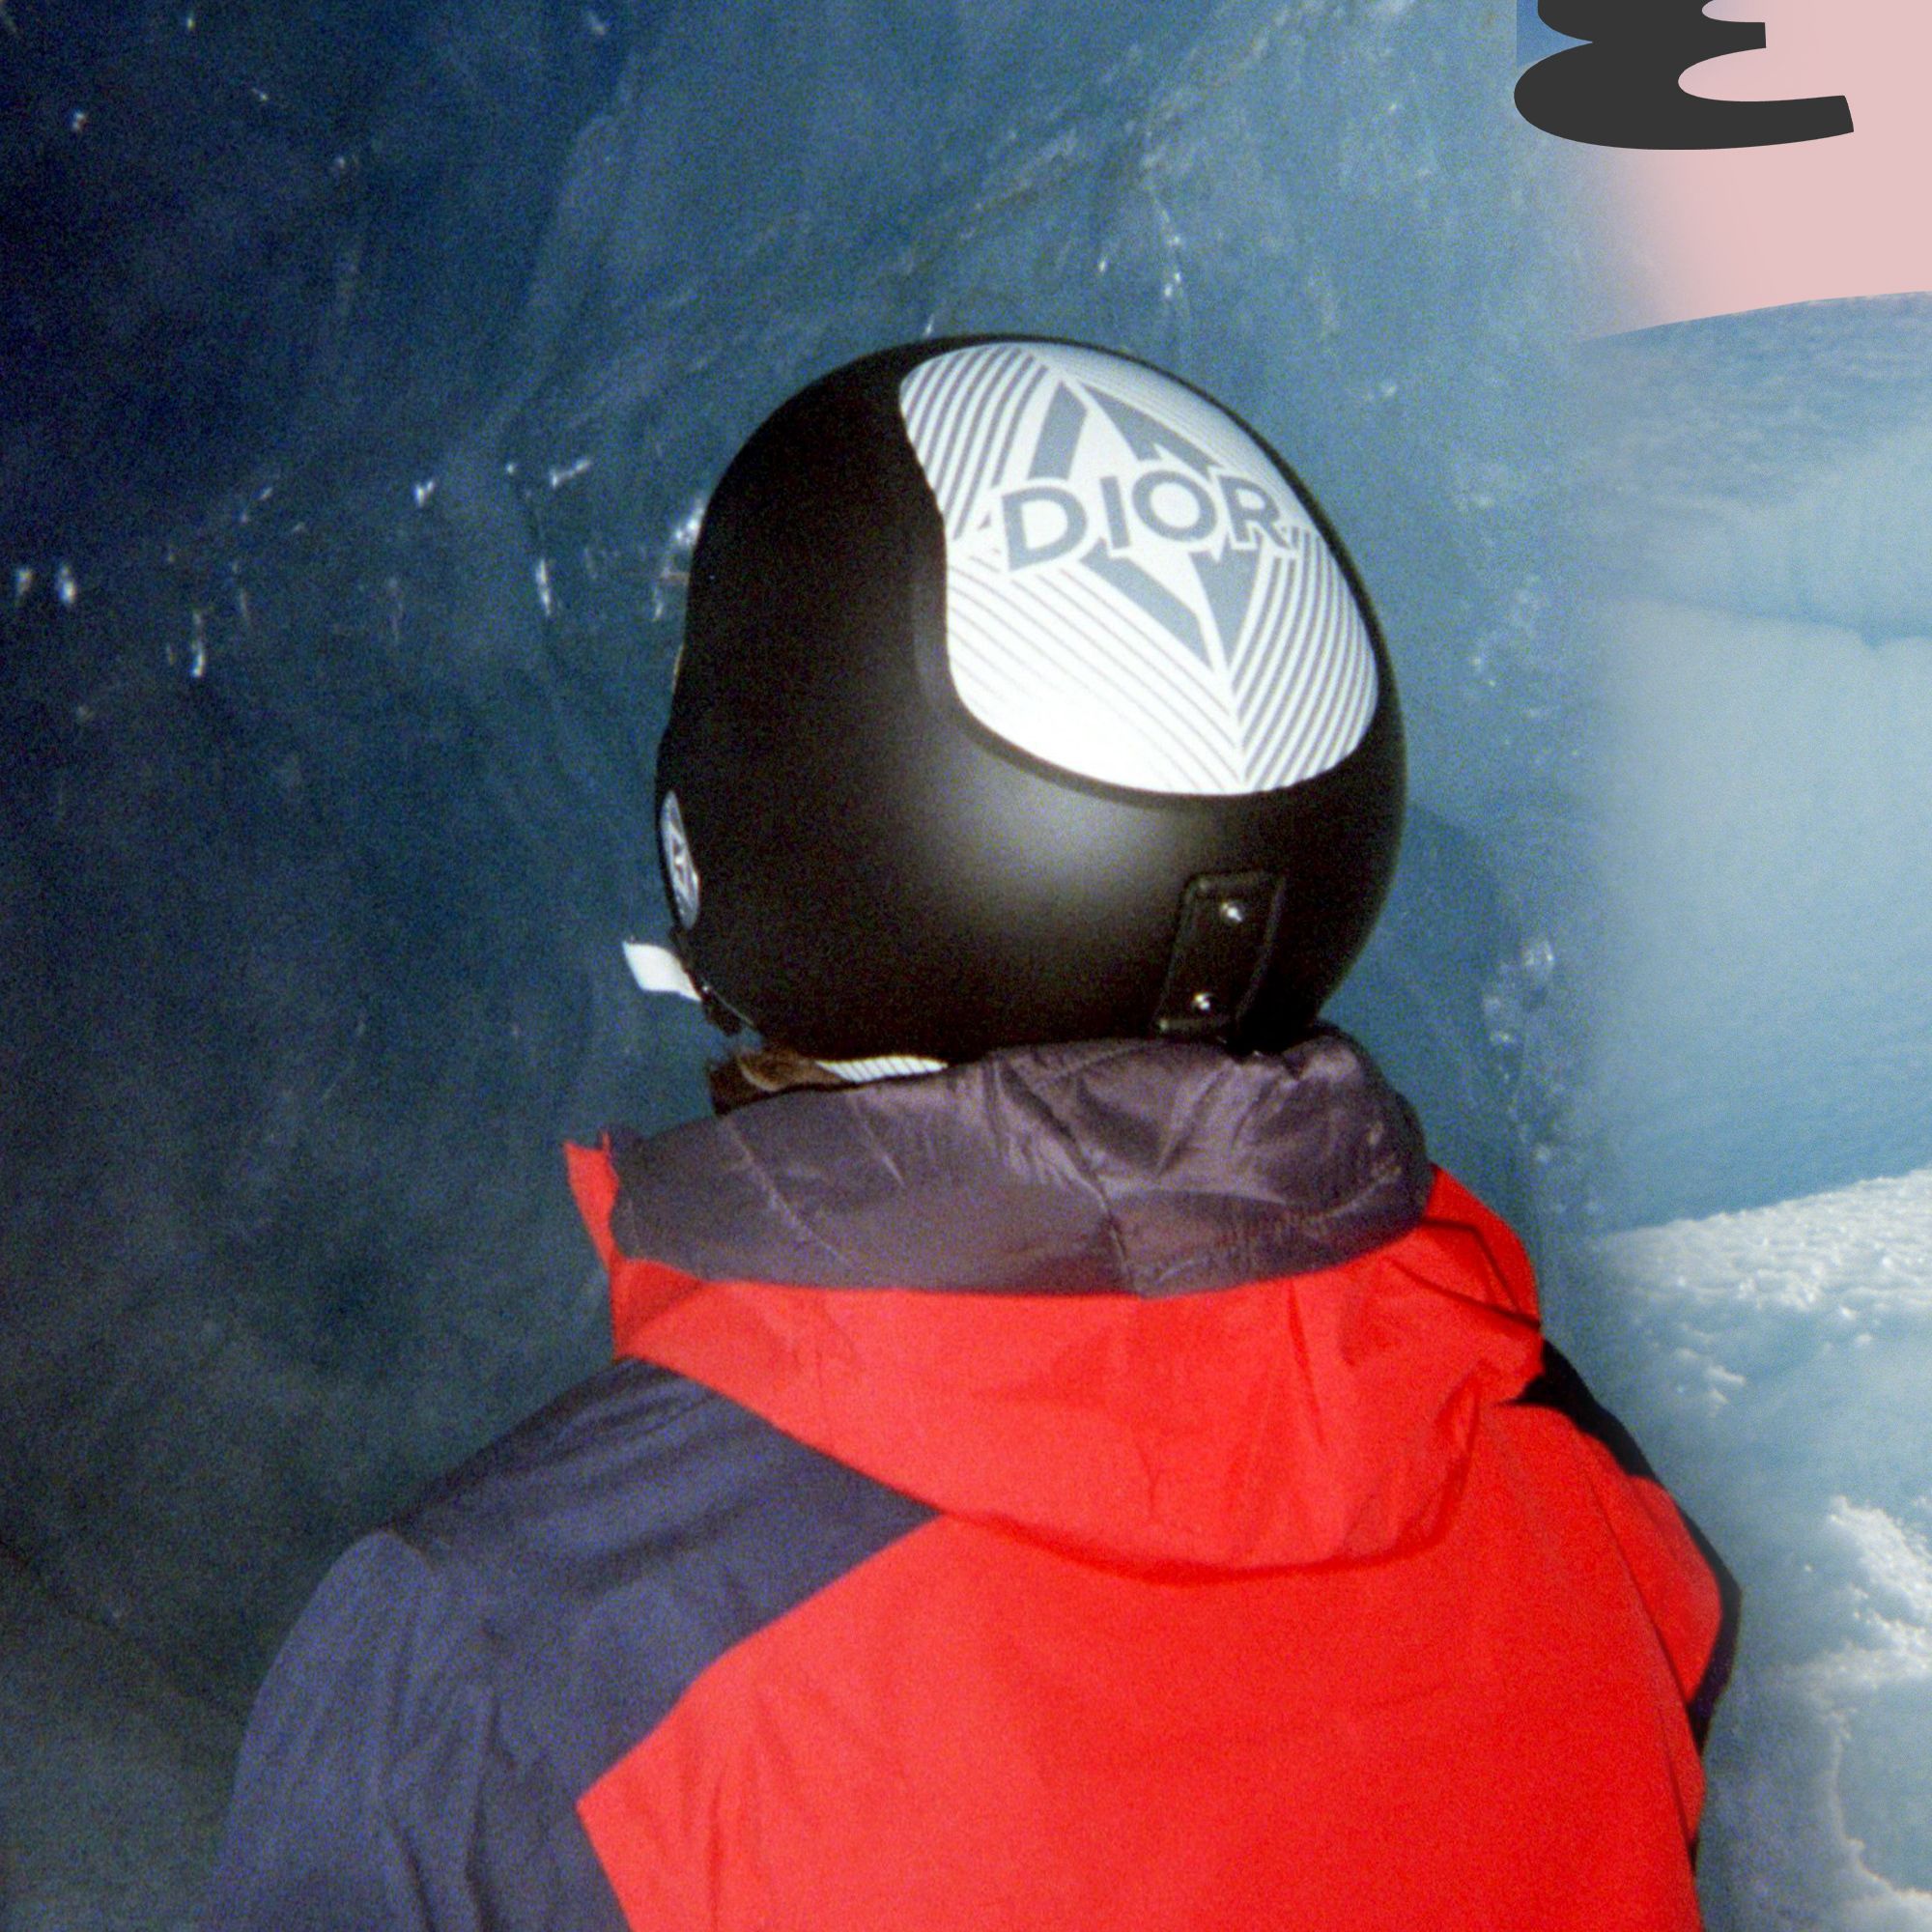 A Dior Helmet Saved My Skull (and Maybe My Life) in Antarctica